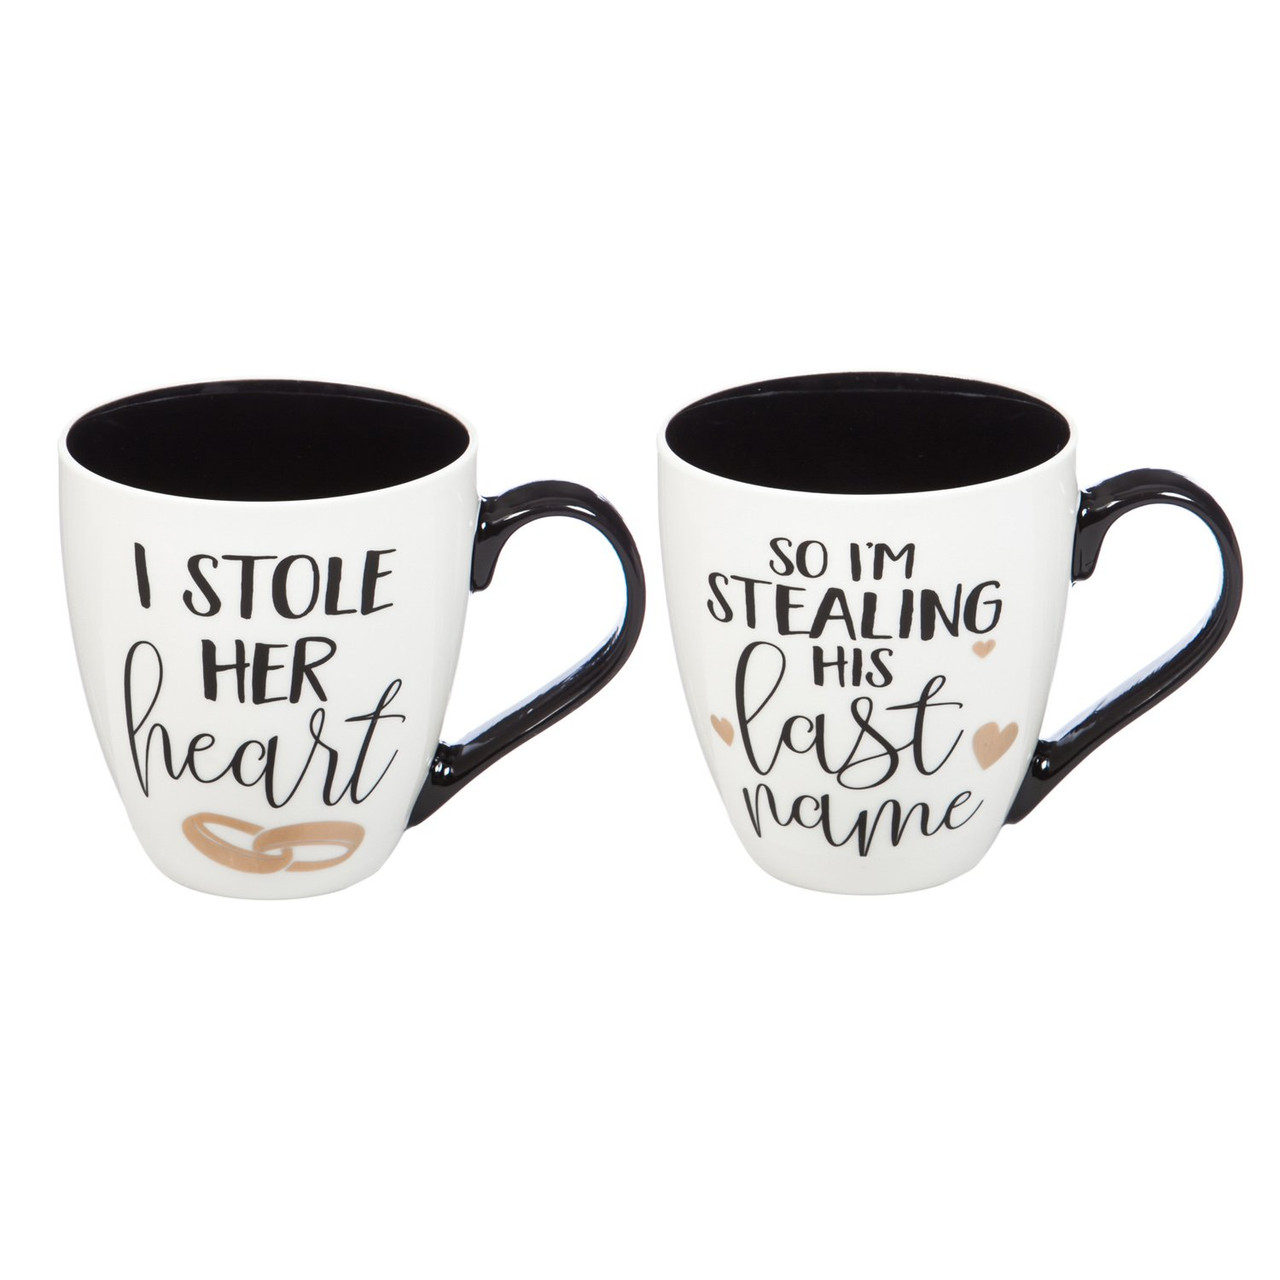 18 ounces Evergreen Enterprises Inc. Cypress Home I Stole Her Heart & Im Stealing His Last Name Wedding Coffee Cup Gift Set of 2 Oversized Mugs 